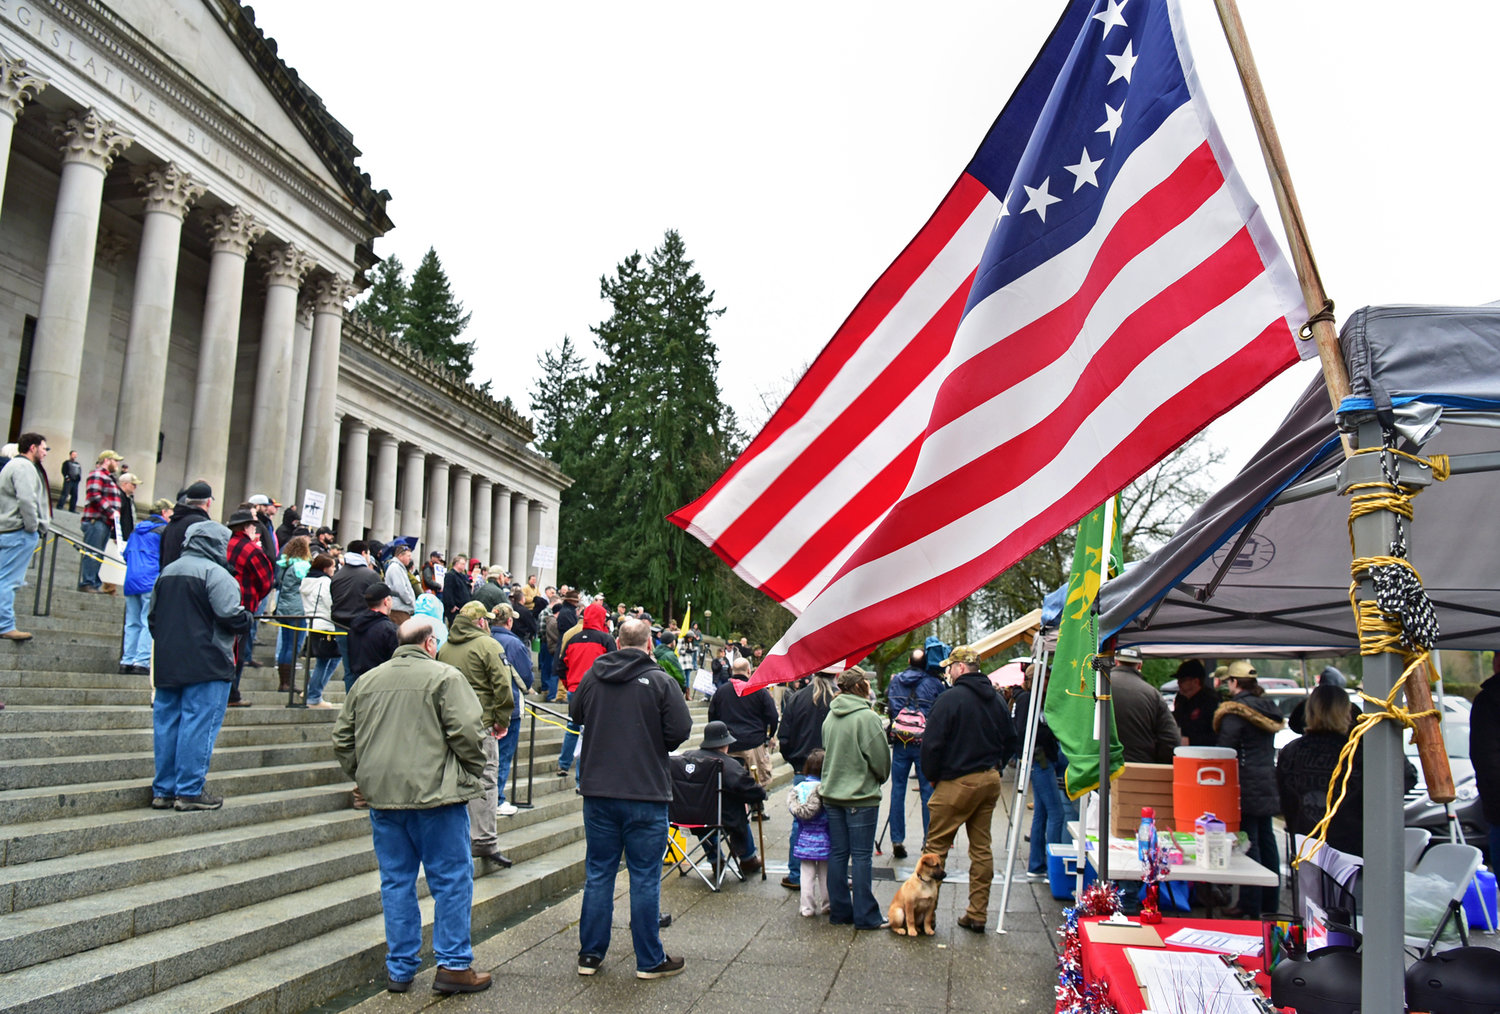 FILE PHOTO — At least 150 people attended the Gun Rights Coalition's Rally 4 UR Rights at the state Capitol in Olympia in this photo taken in 2018.